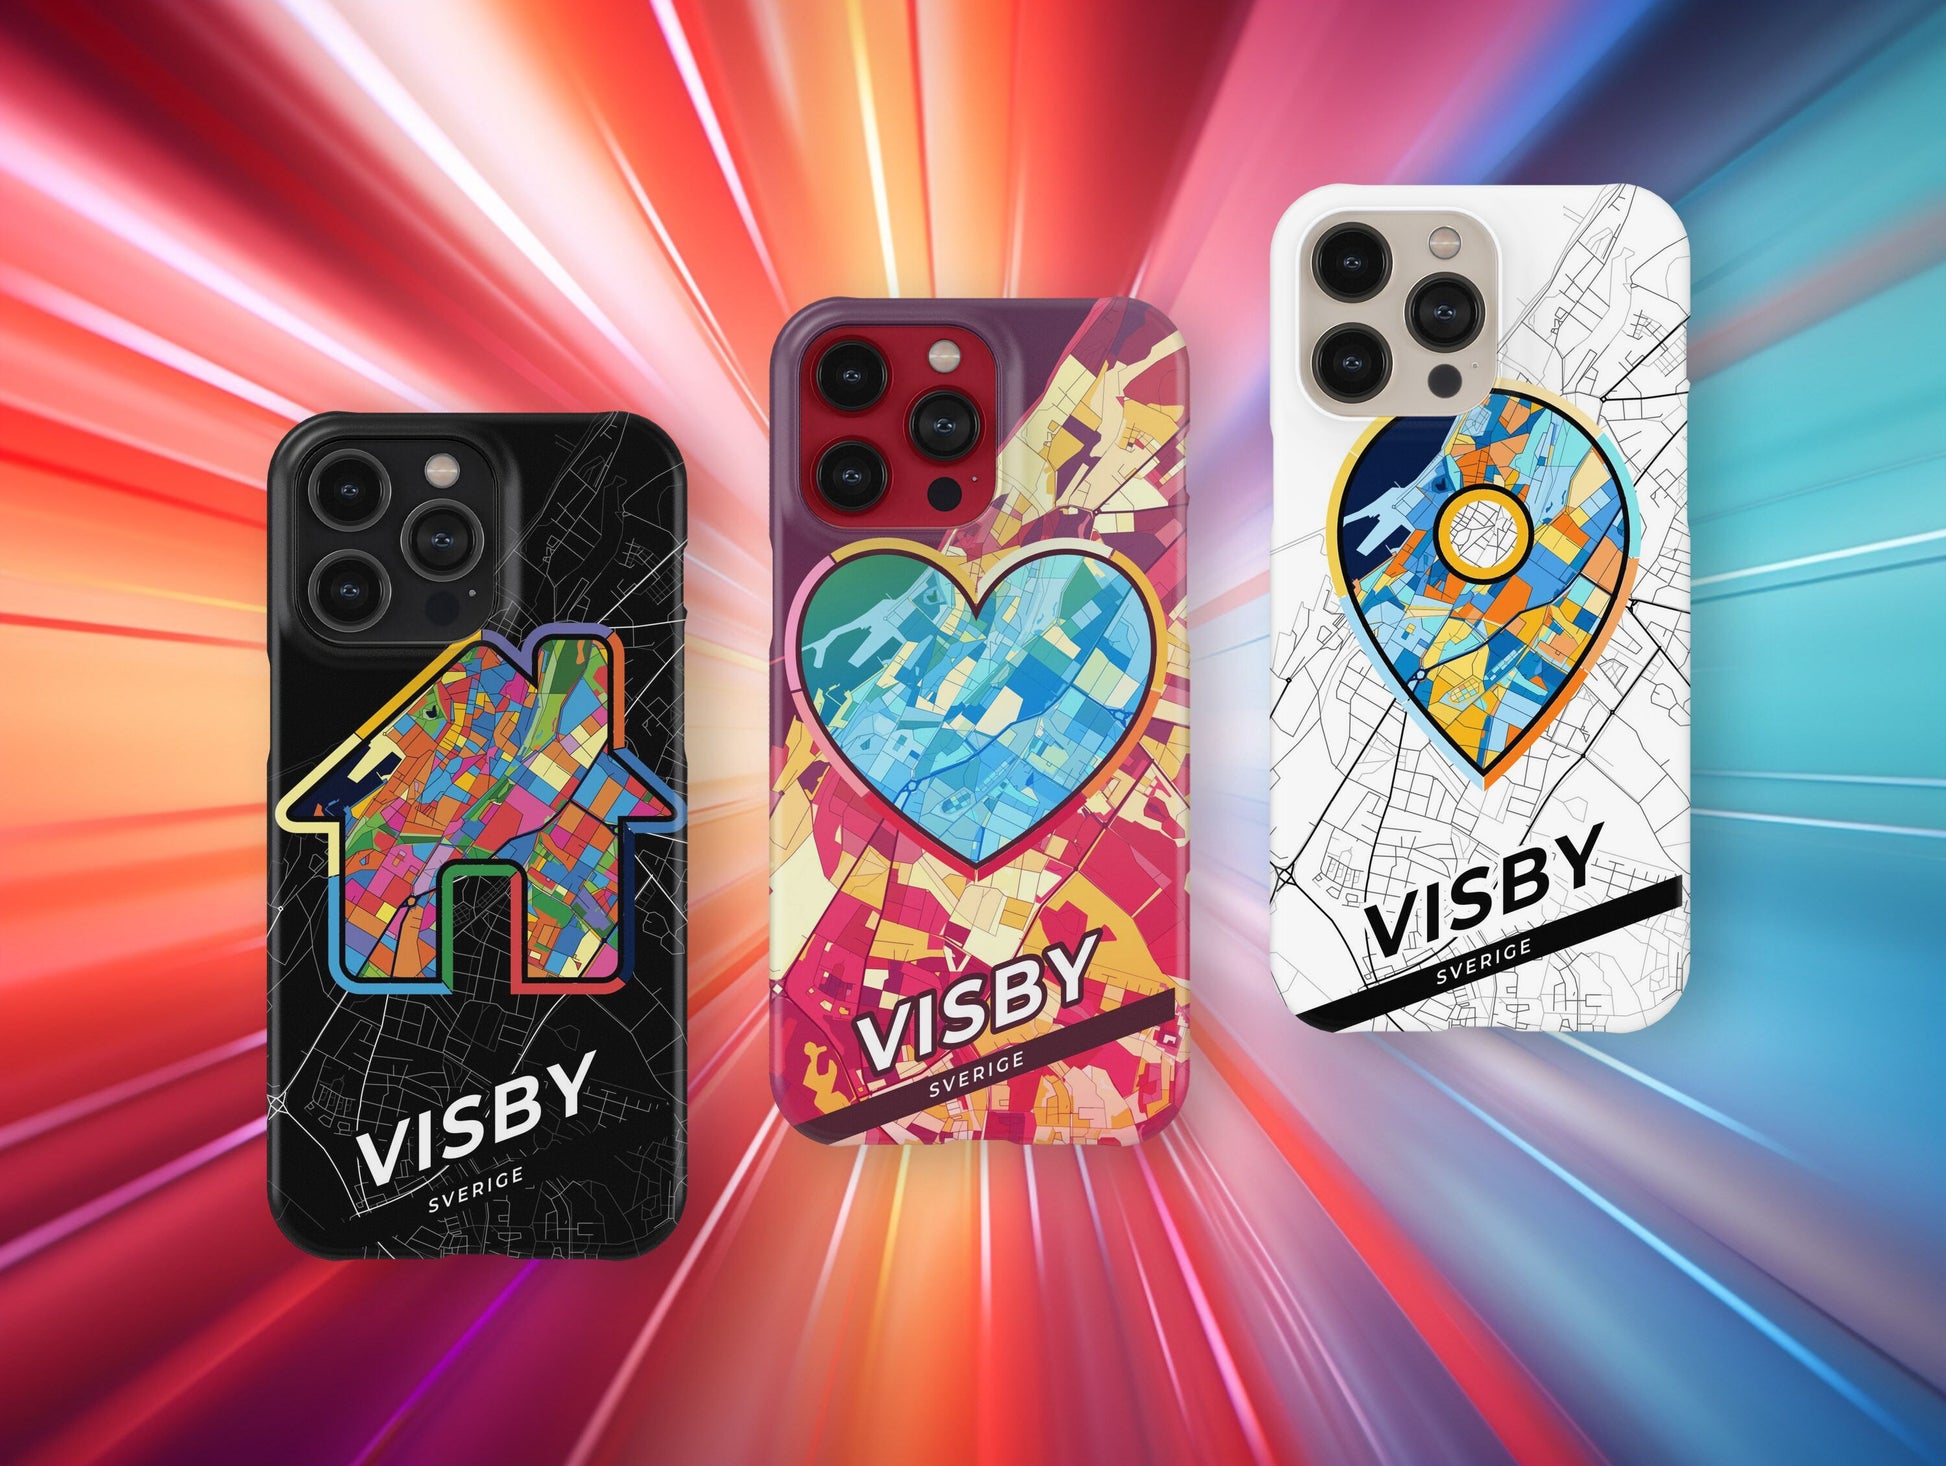 Visby Sweden slim phone case with colorful icon